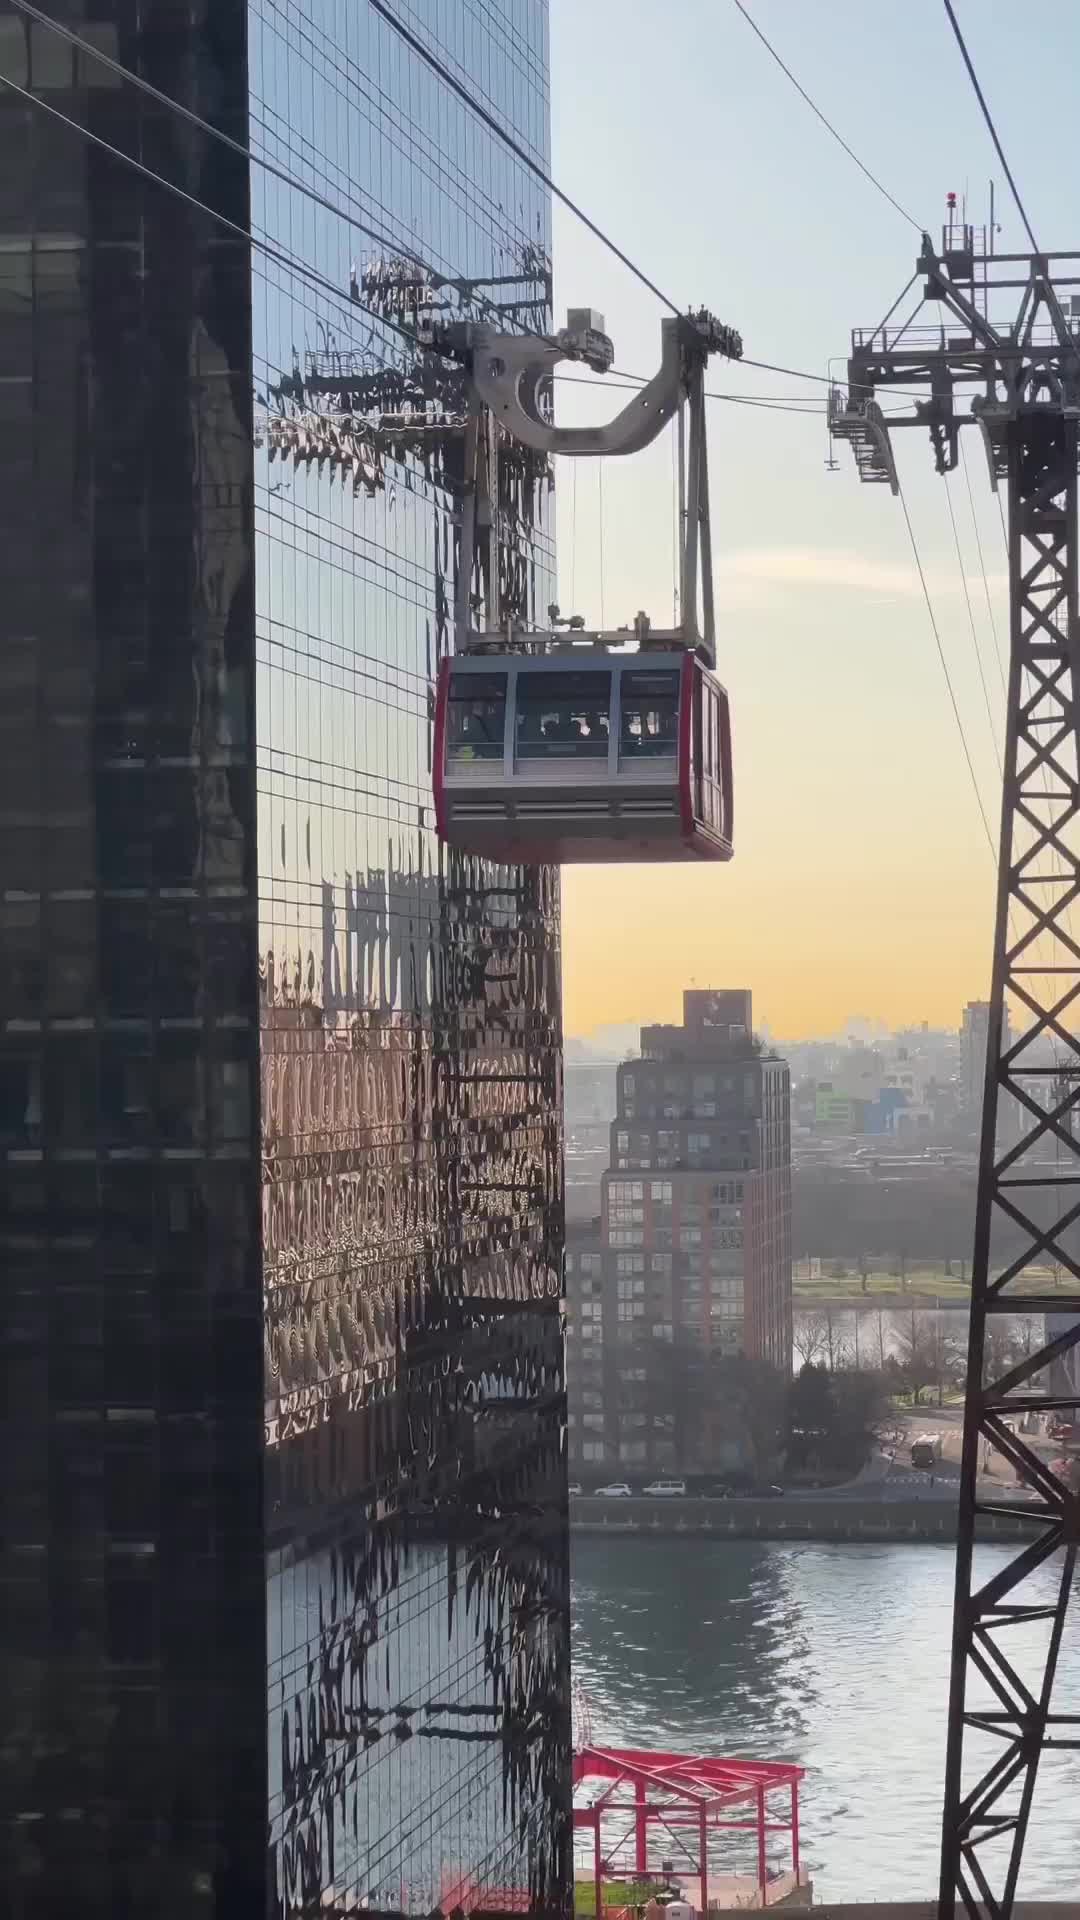 First Urban Tram in the US - Roosevelt Island Tramway